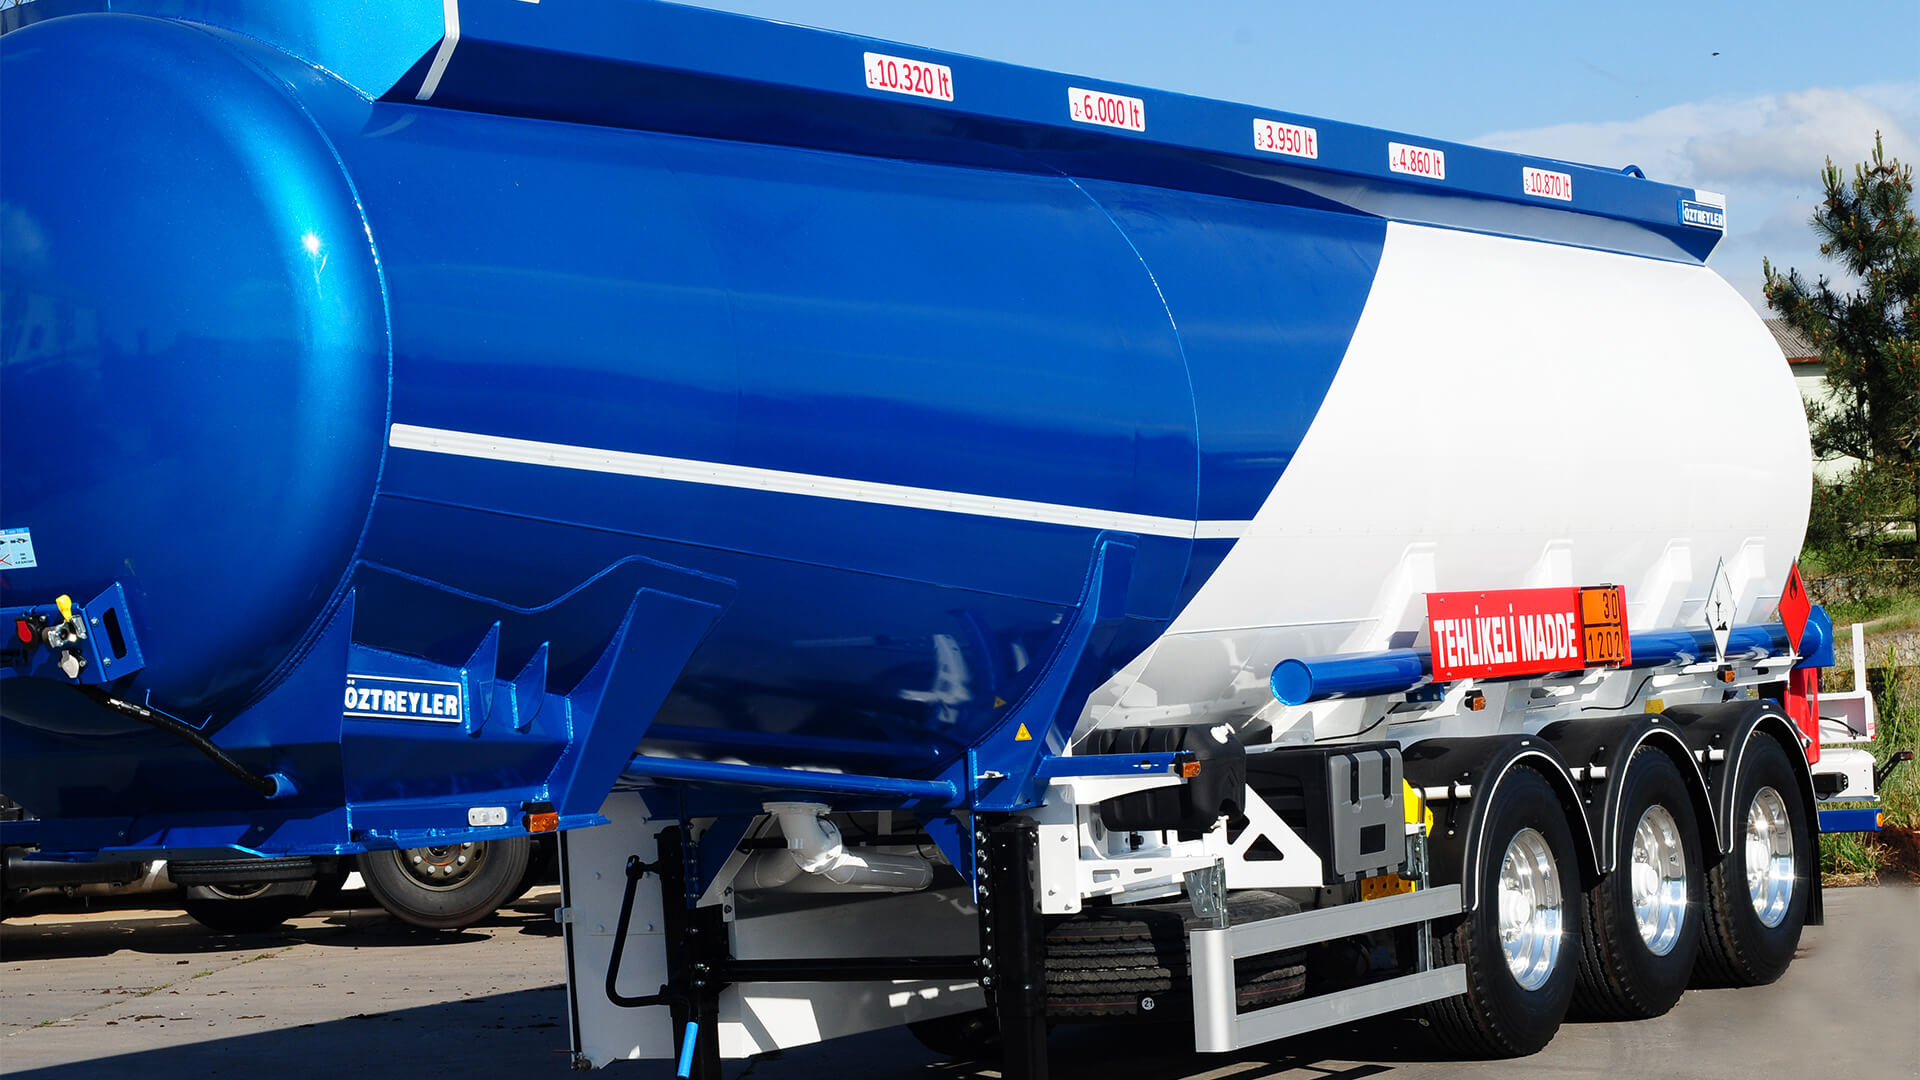 Steel Cylindrical Conical Tanker Semi-Trailer